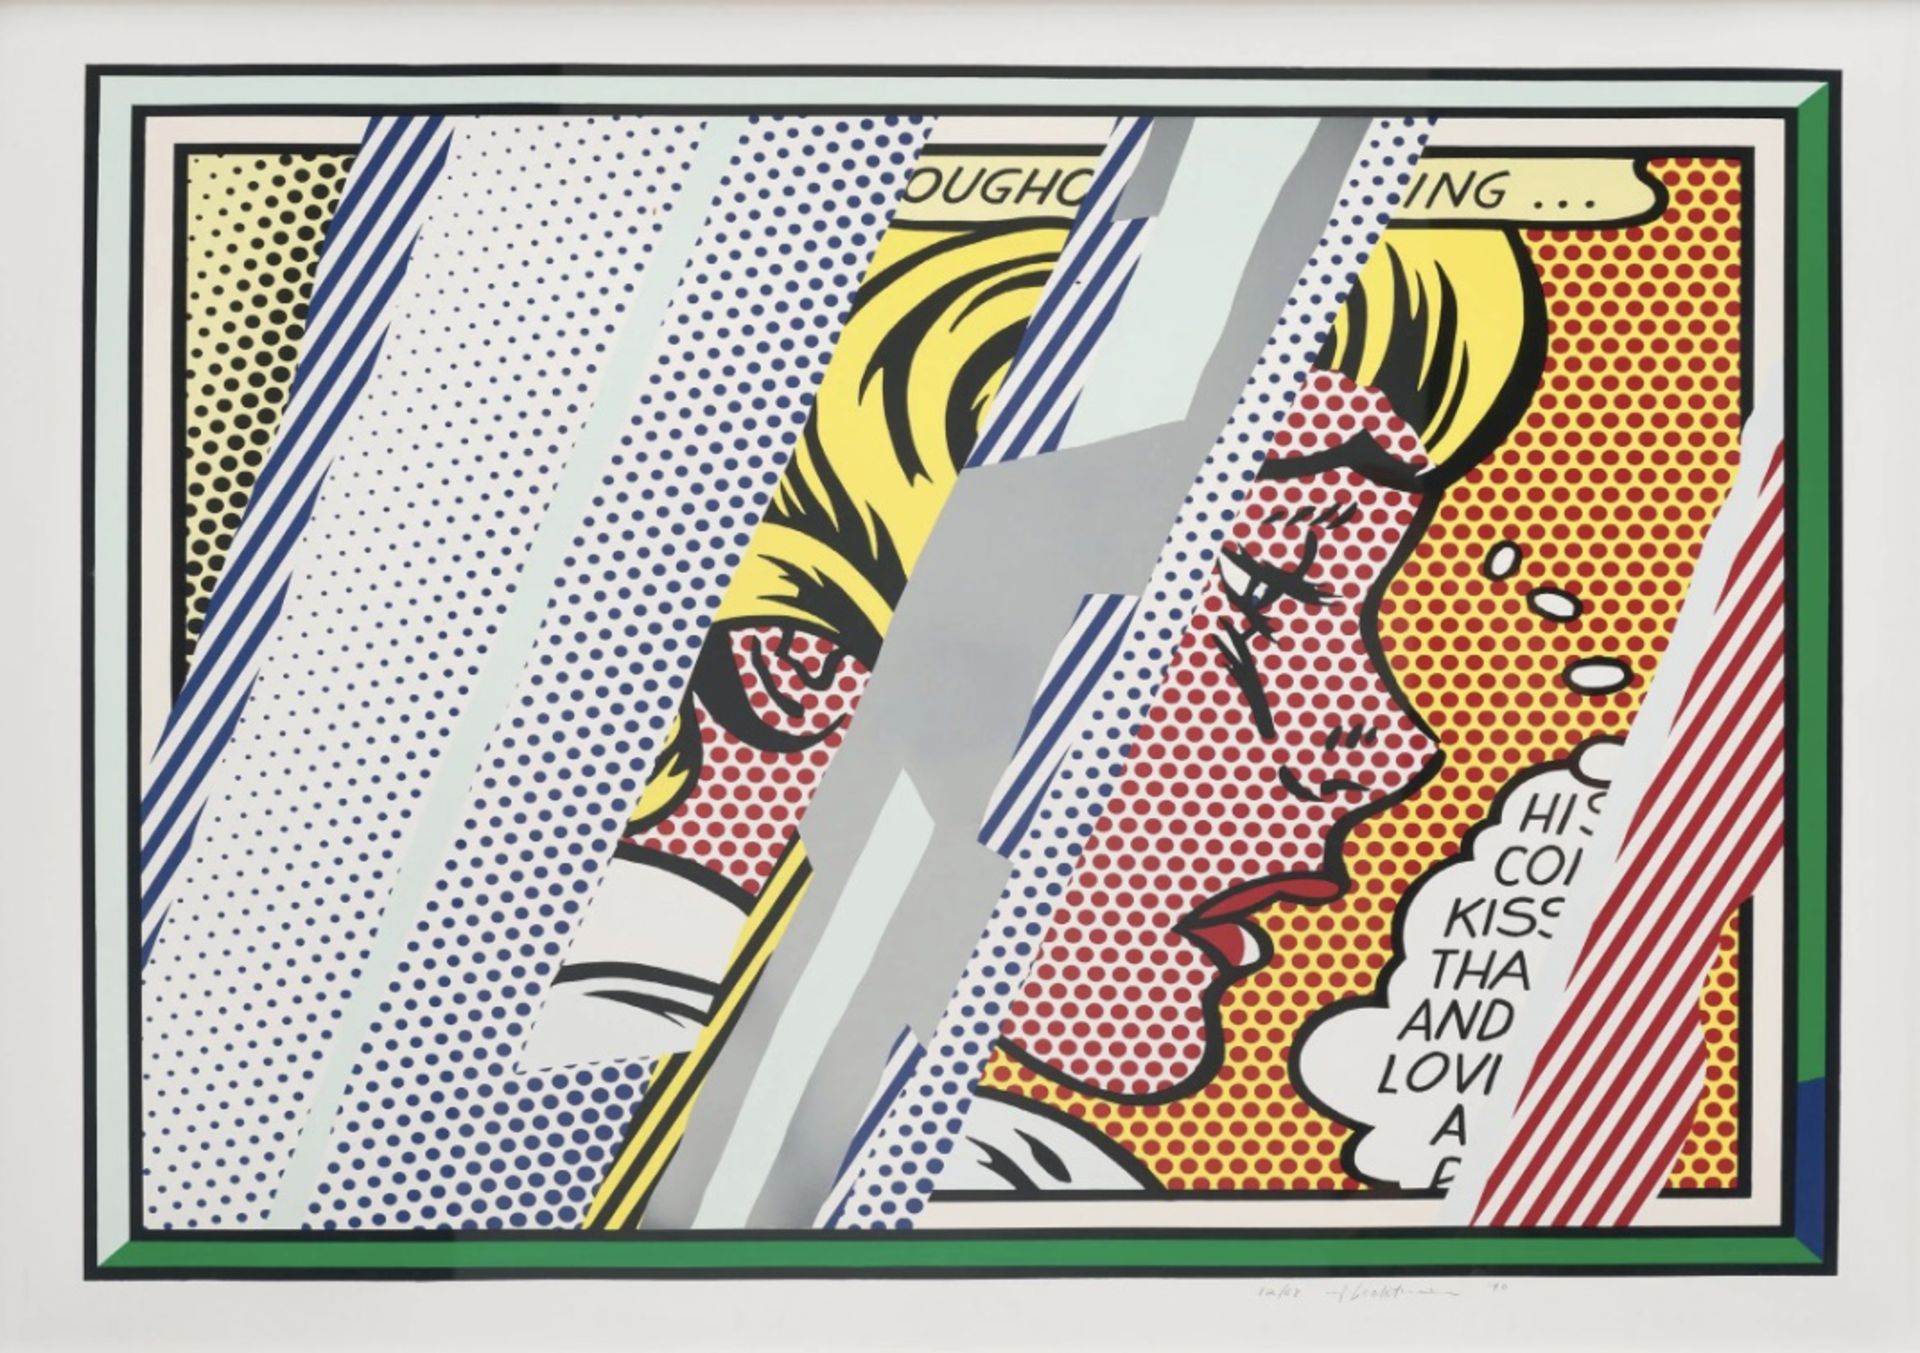 Roy Lichtenstein "Reflections on Girl, 1990" Plate Signed Offset Lithograph